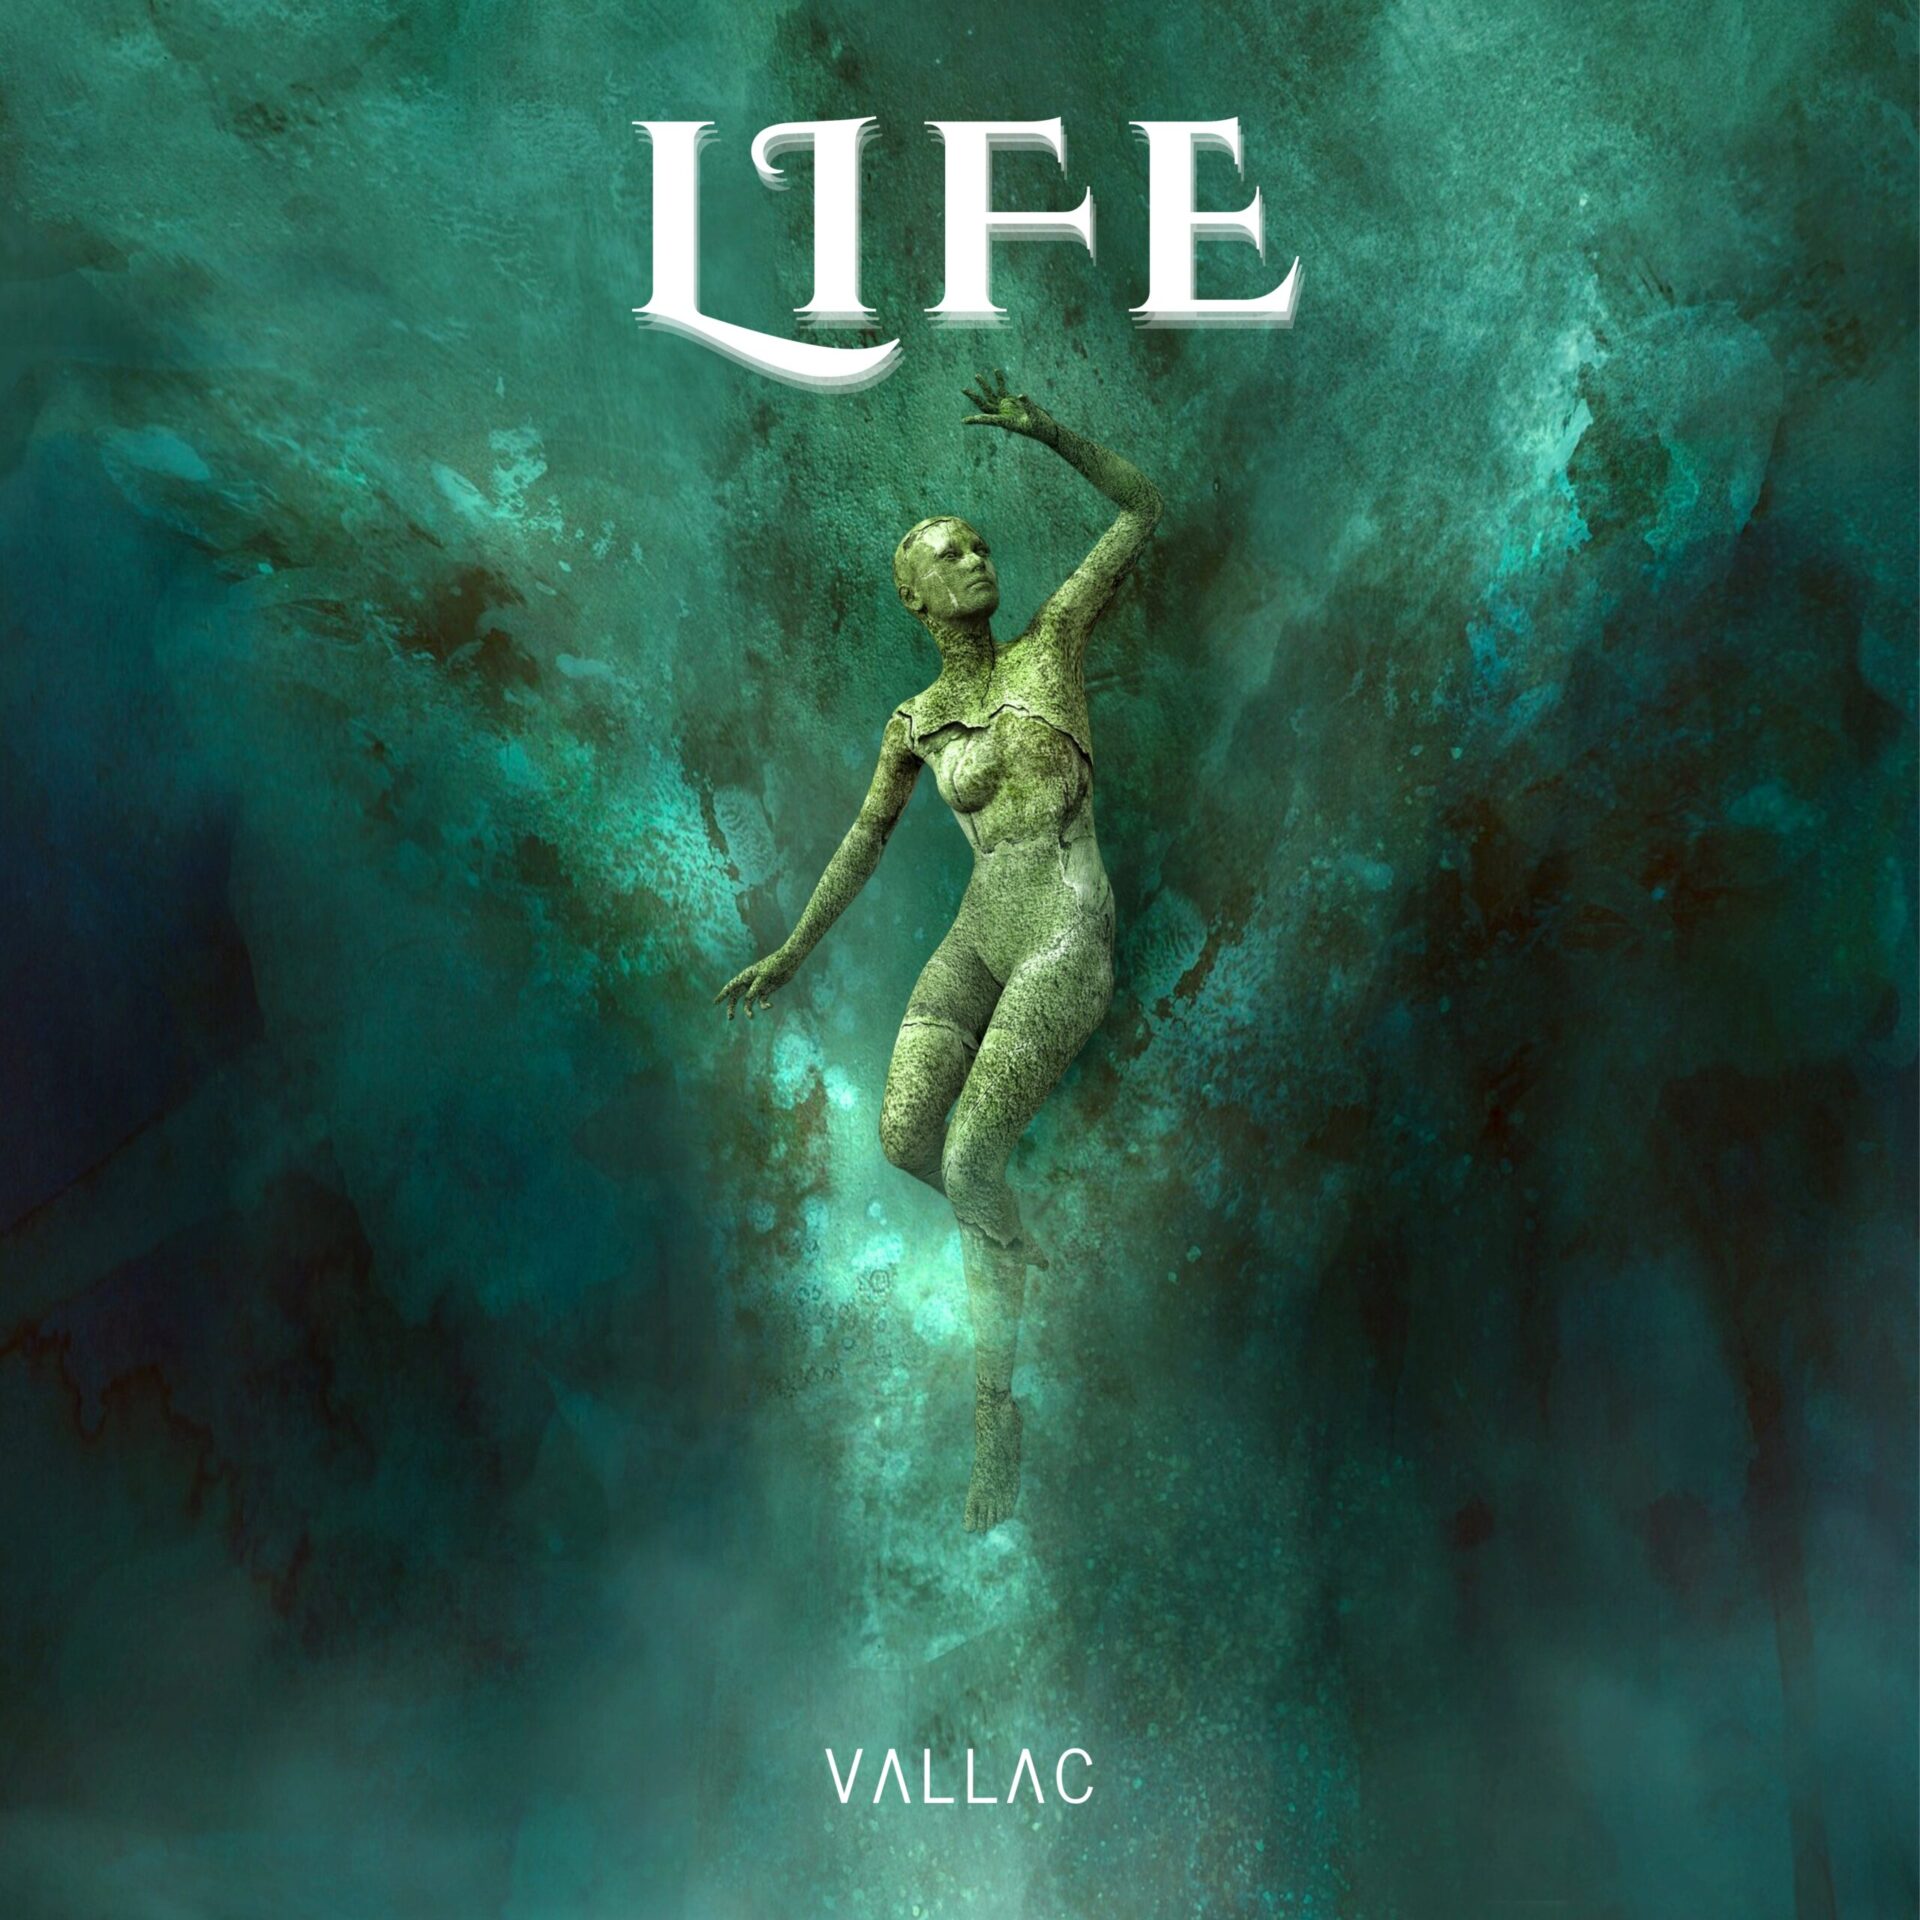 Vallac with Life, a copertina Ep cover art